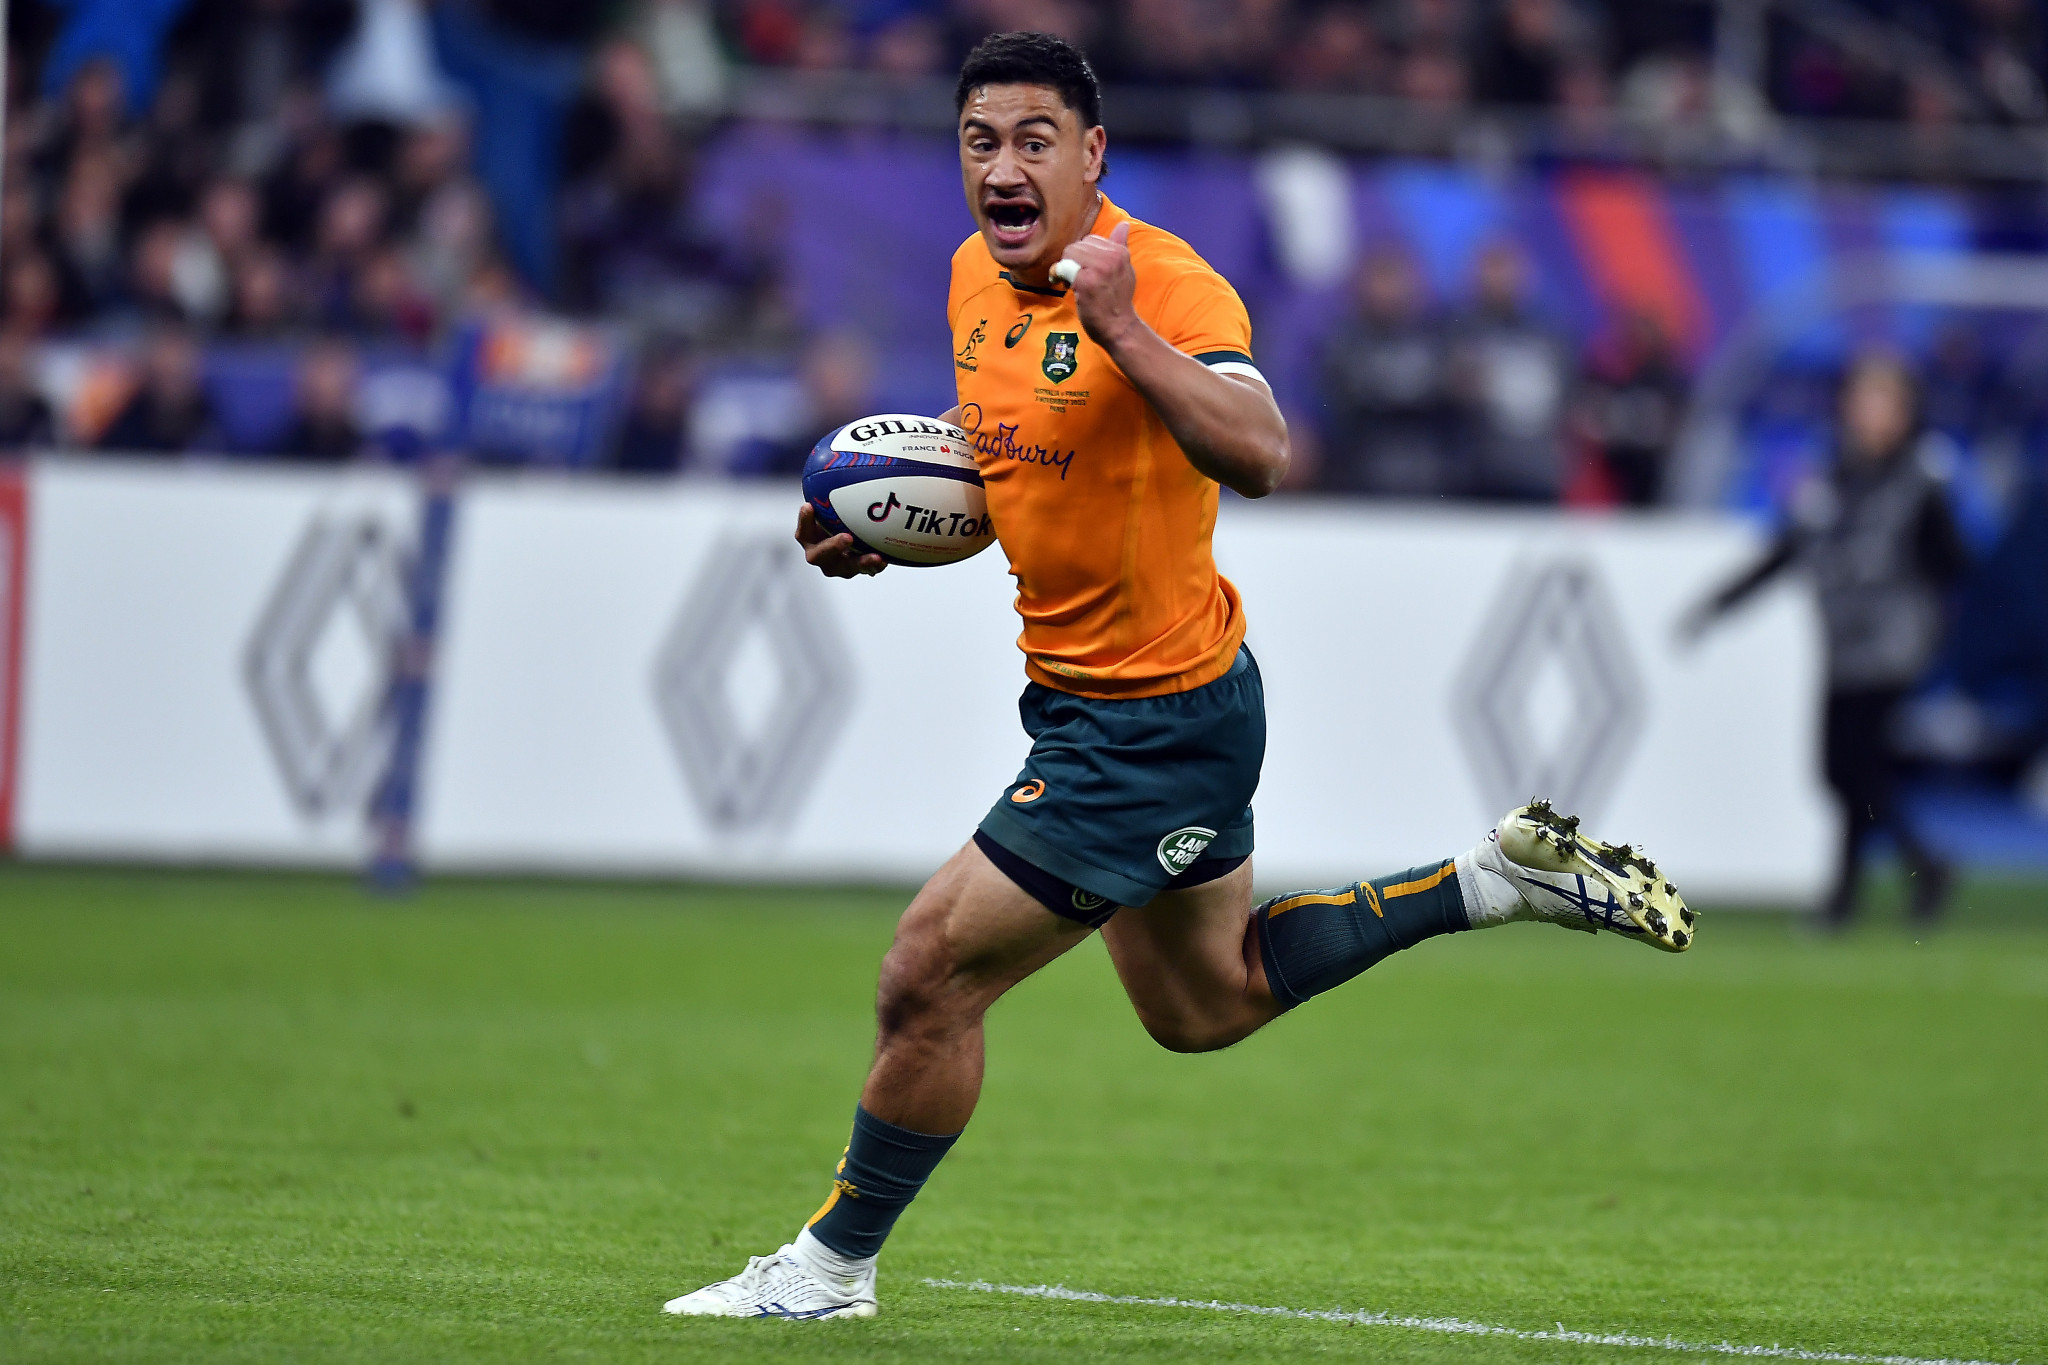 Australian rugby sevens side could prepare for Paris 2024 in Montpellier as part of cooperation between nations